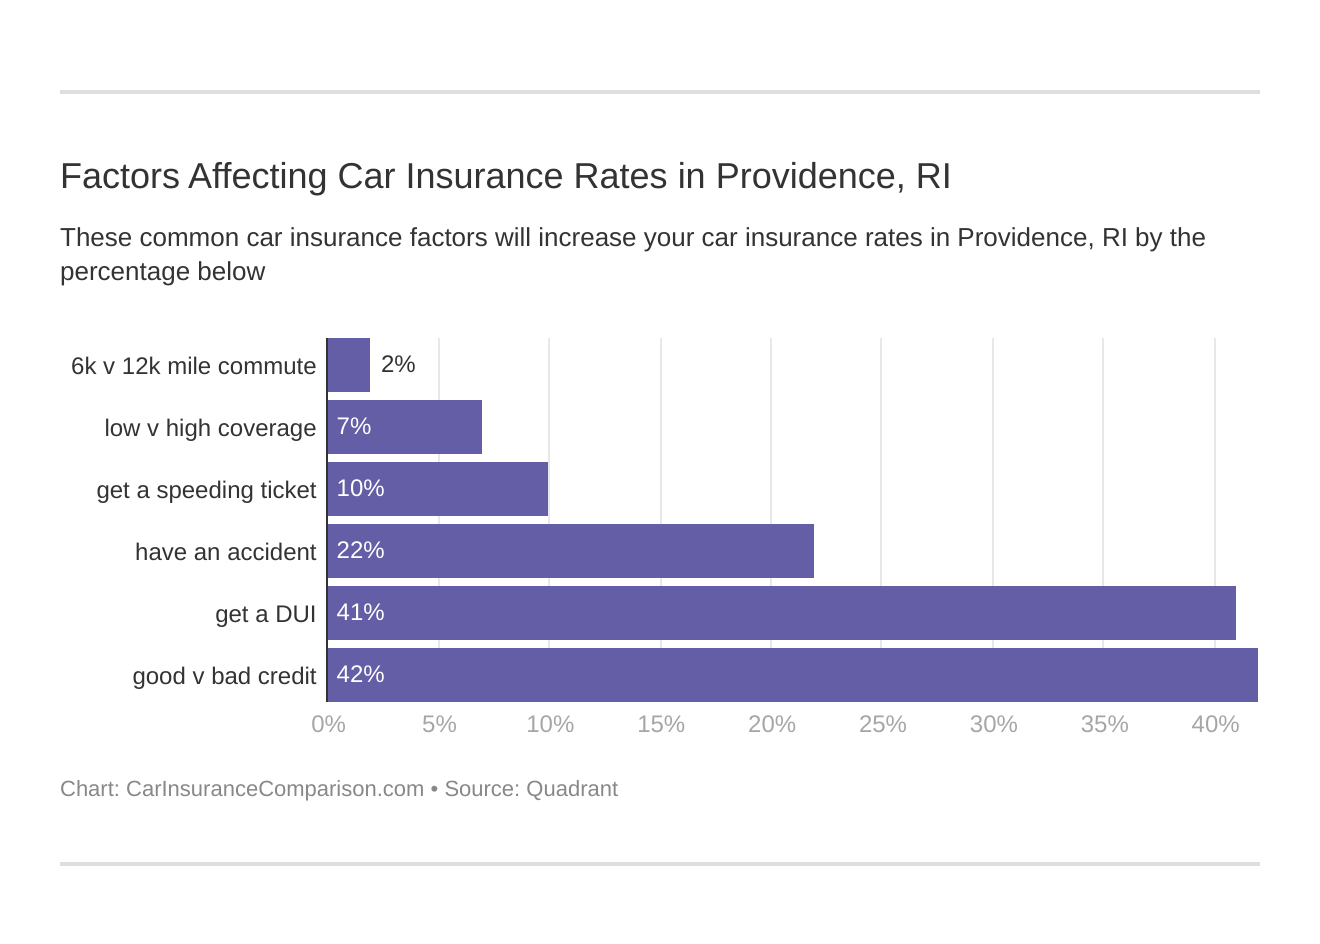 Factors Affecting Car Insurance Rates in Providence, RI